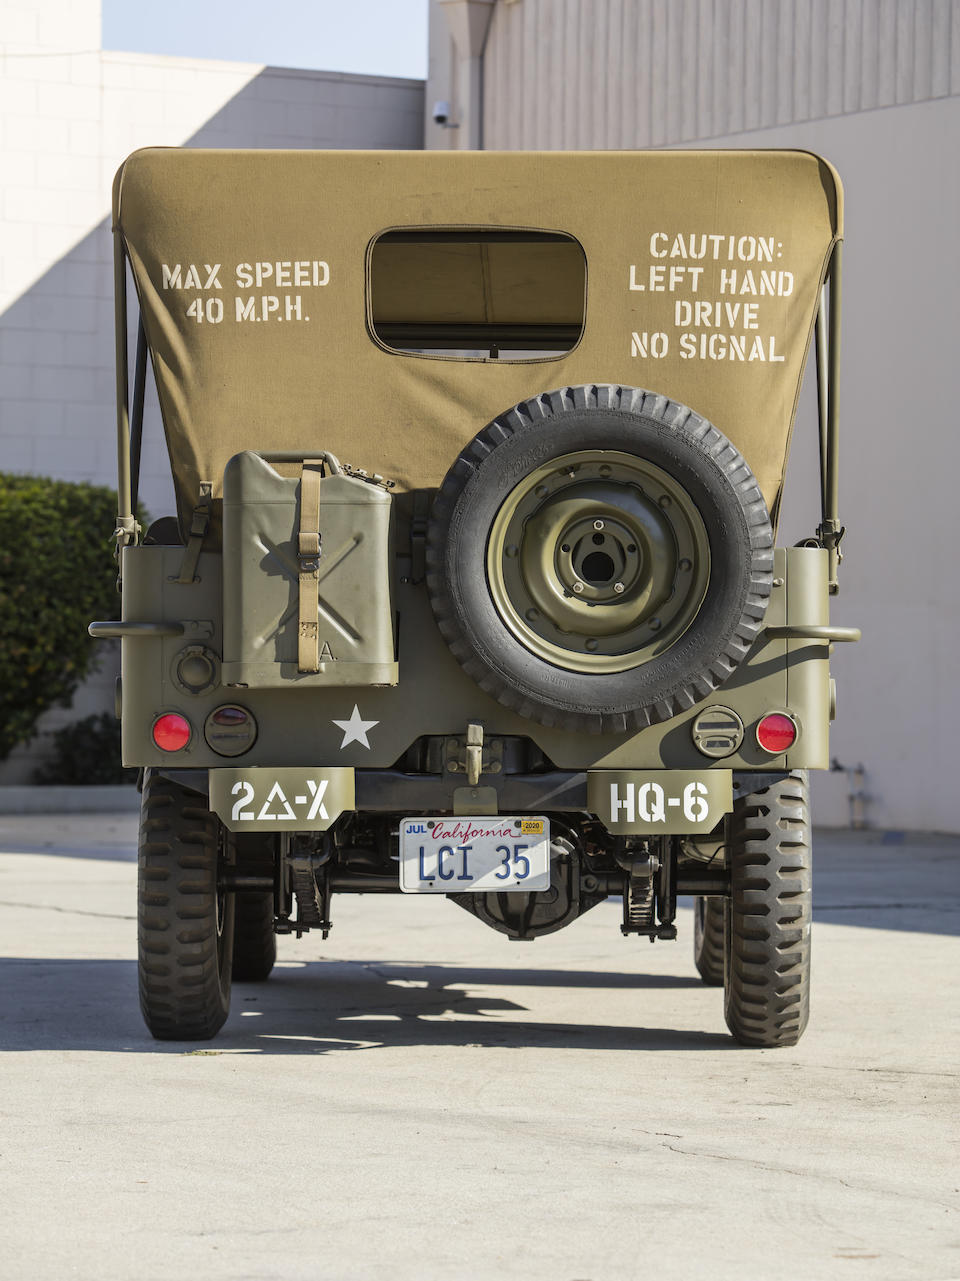 <b>1942 Willys GPW 'Jeep'</b><br />Chassis no. GPW80474